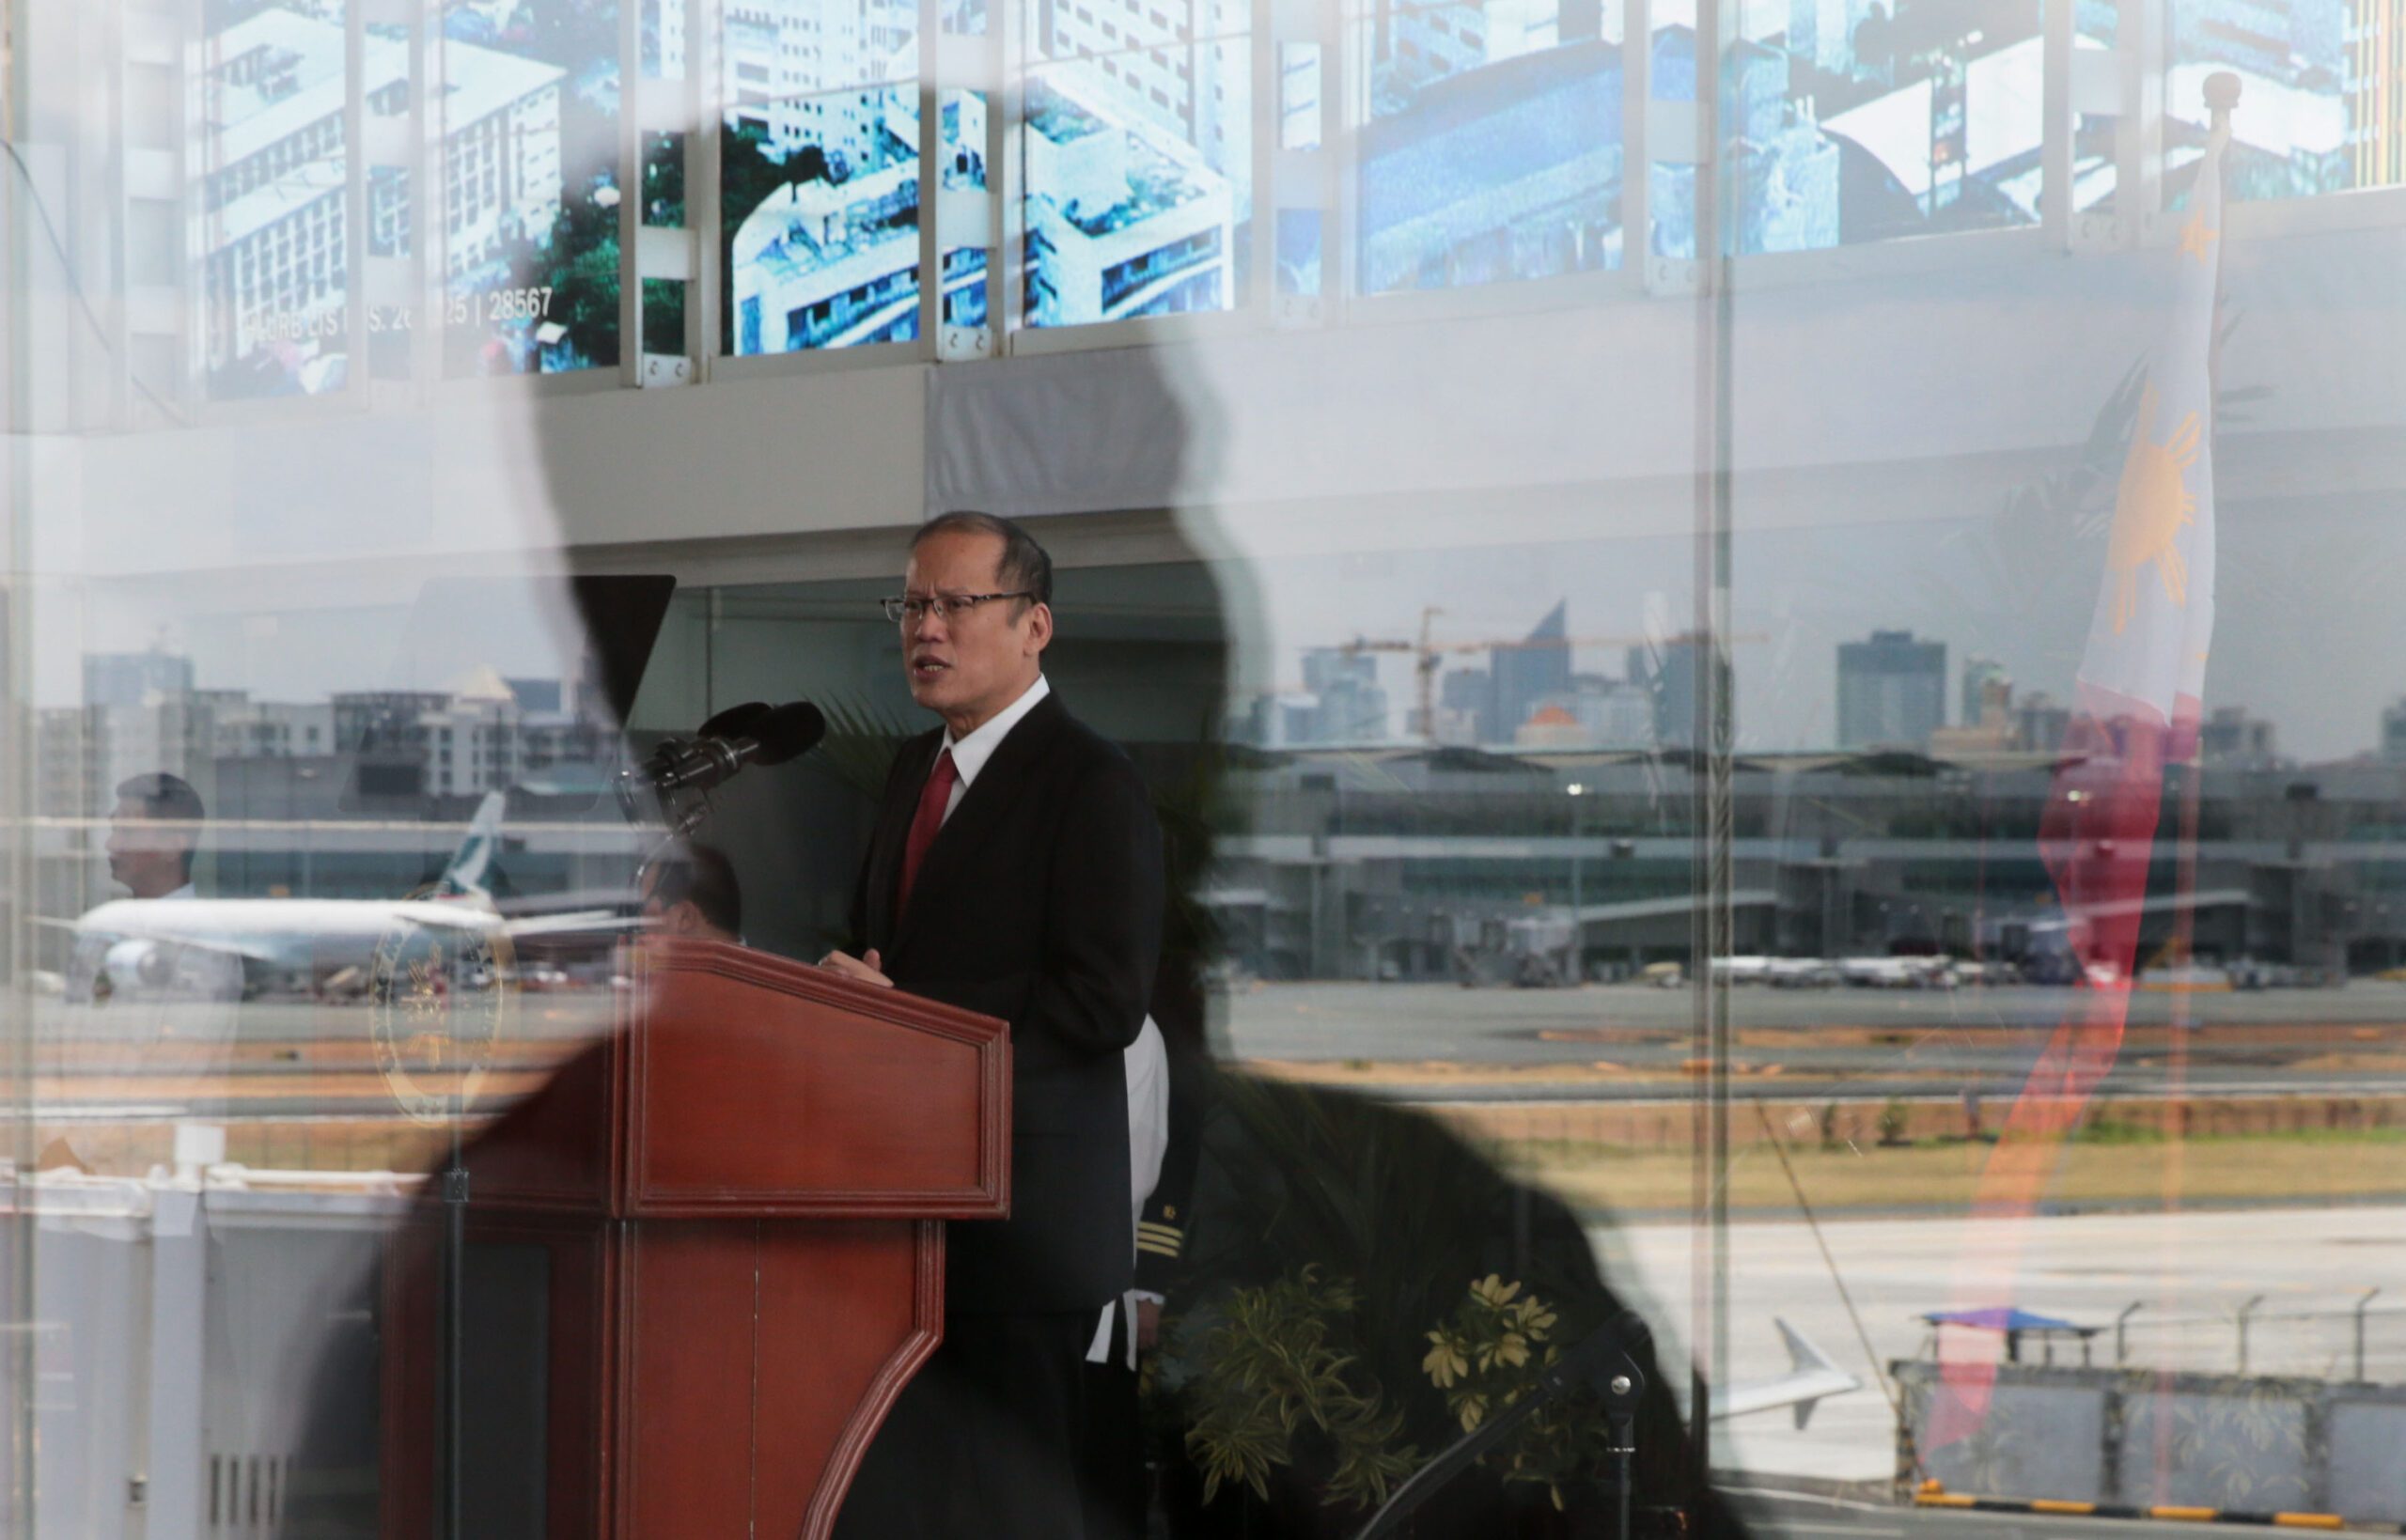 Aquino to appeal for Mary Jane’s life at Malaysia summit